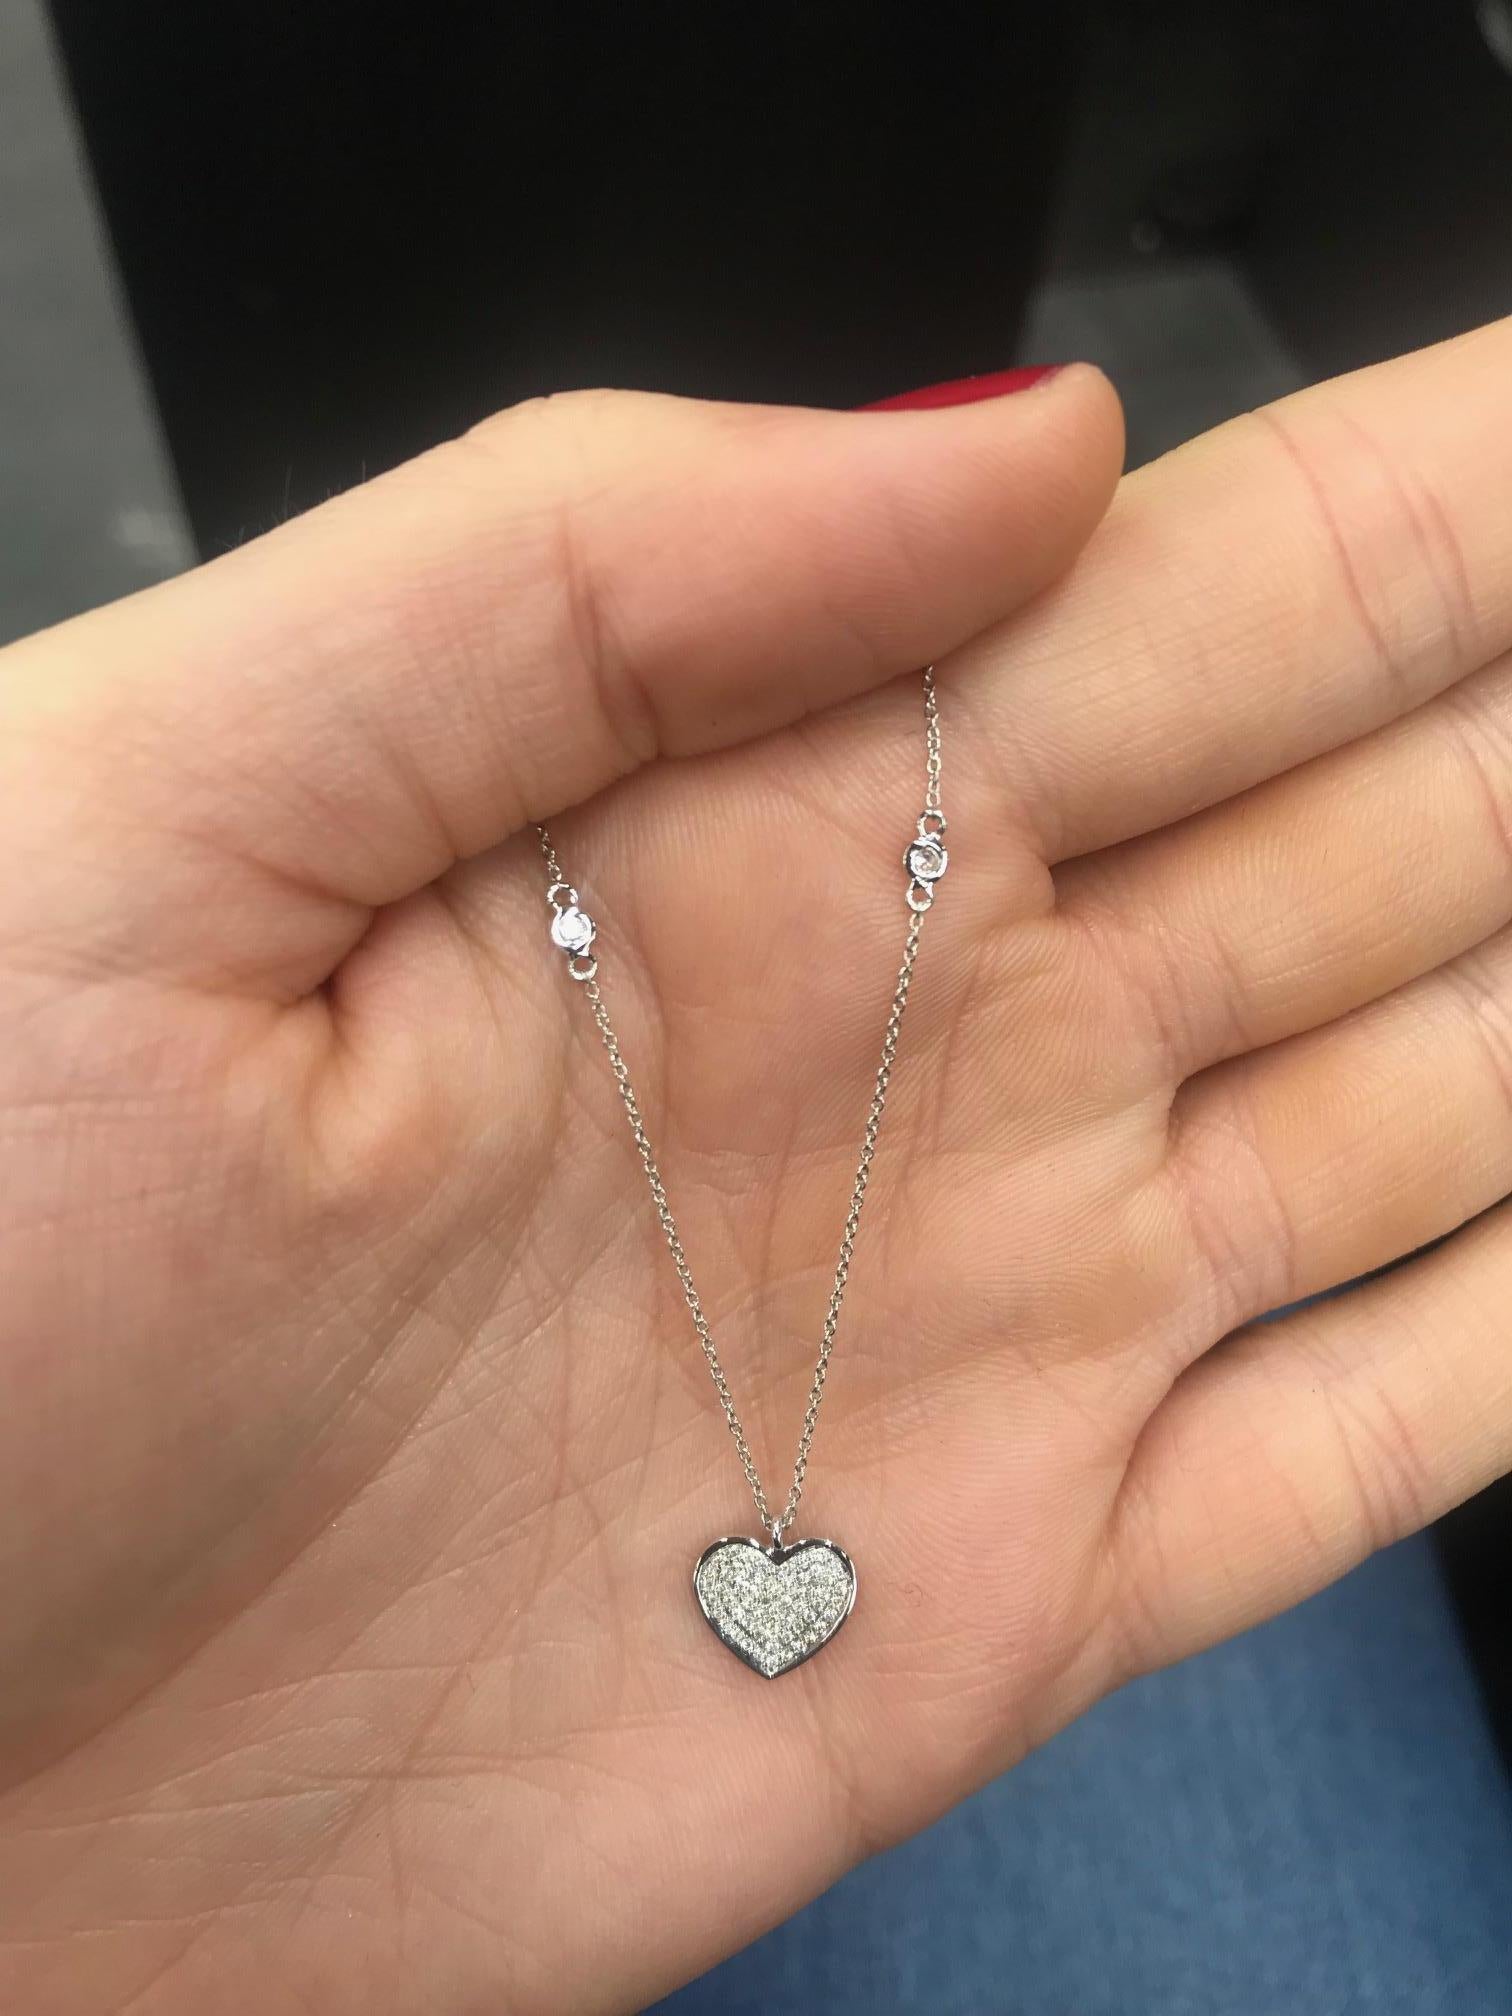 18K White gold necklace featuring one diamond heart weighing 0.10 carats.